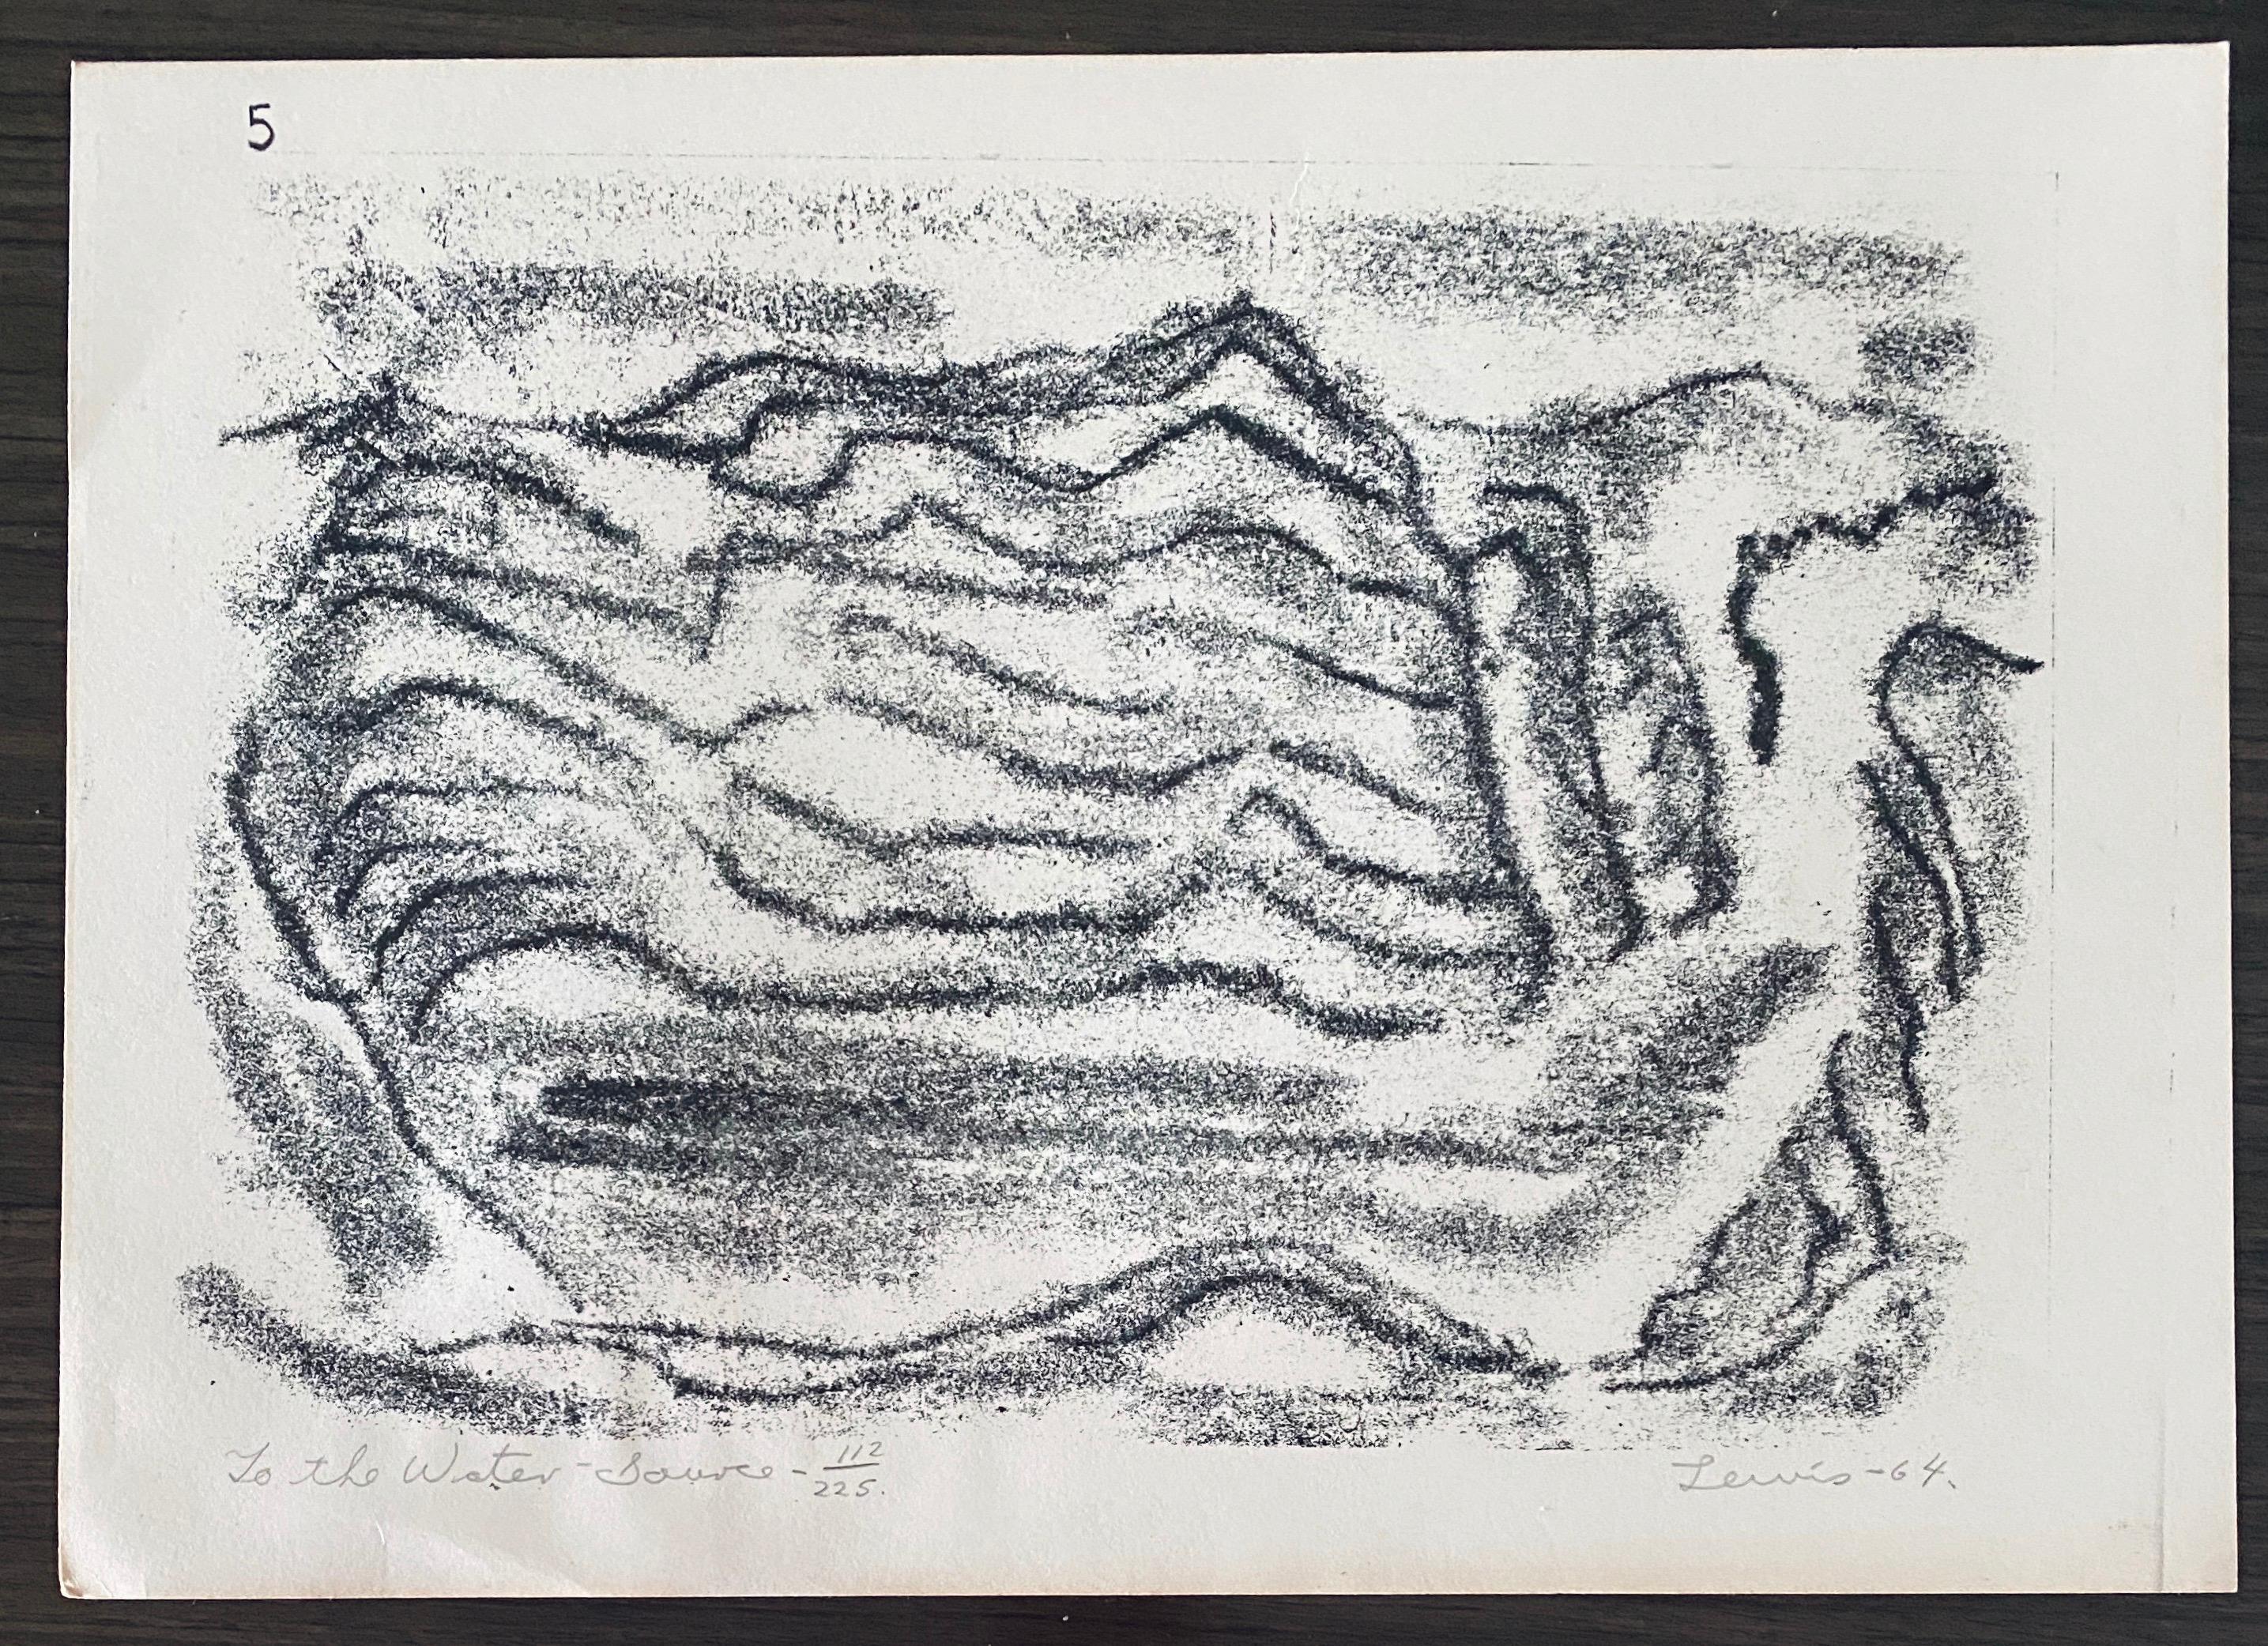 Stanley Lewis Abstract Print - "To The Water Source" from Wanderers Illustrations 112/225